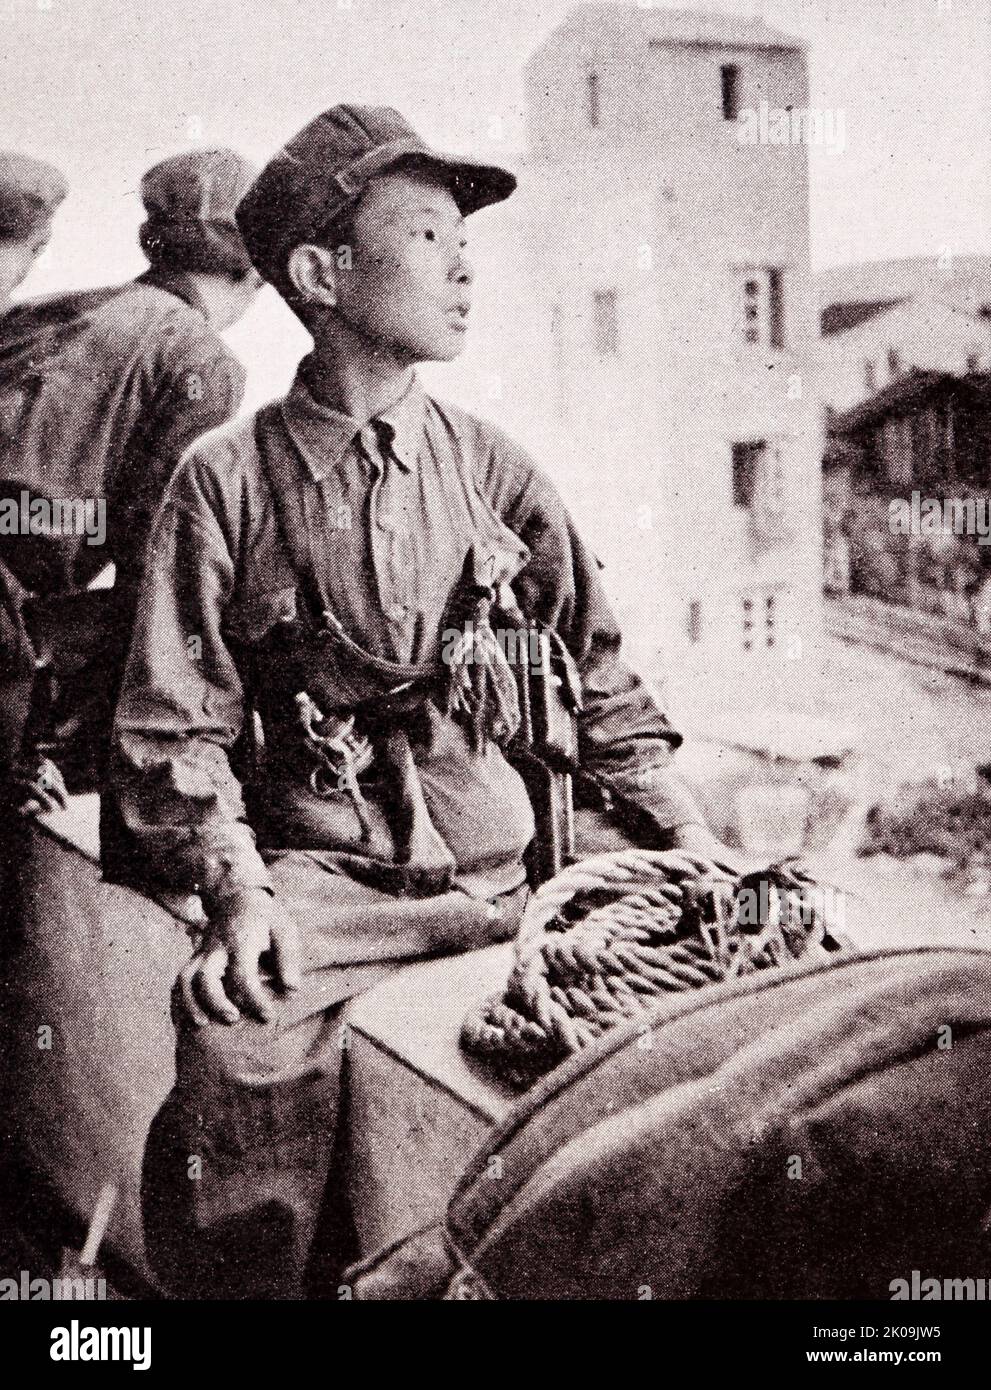 Communist Chinese Red Army boy soldier in 1949. The Chinese Workers' and Peasants' Red Army or Chinese Workers' and Peasants' Revolutionary Army, commonly known as the Chinese Red Army or simply the Red Army, was the armed forces of the Chinese Communist Party from 1928 to 1937. Stock Photo